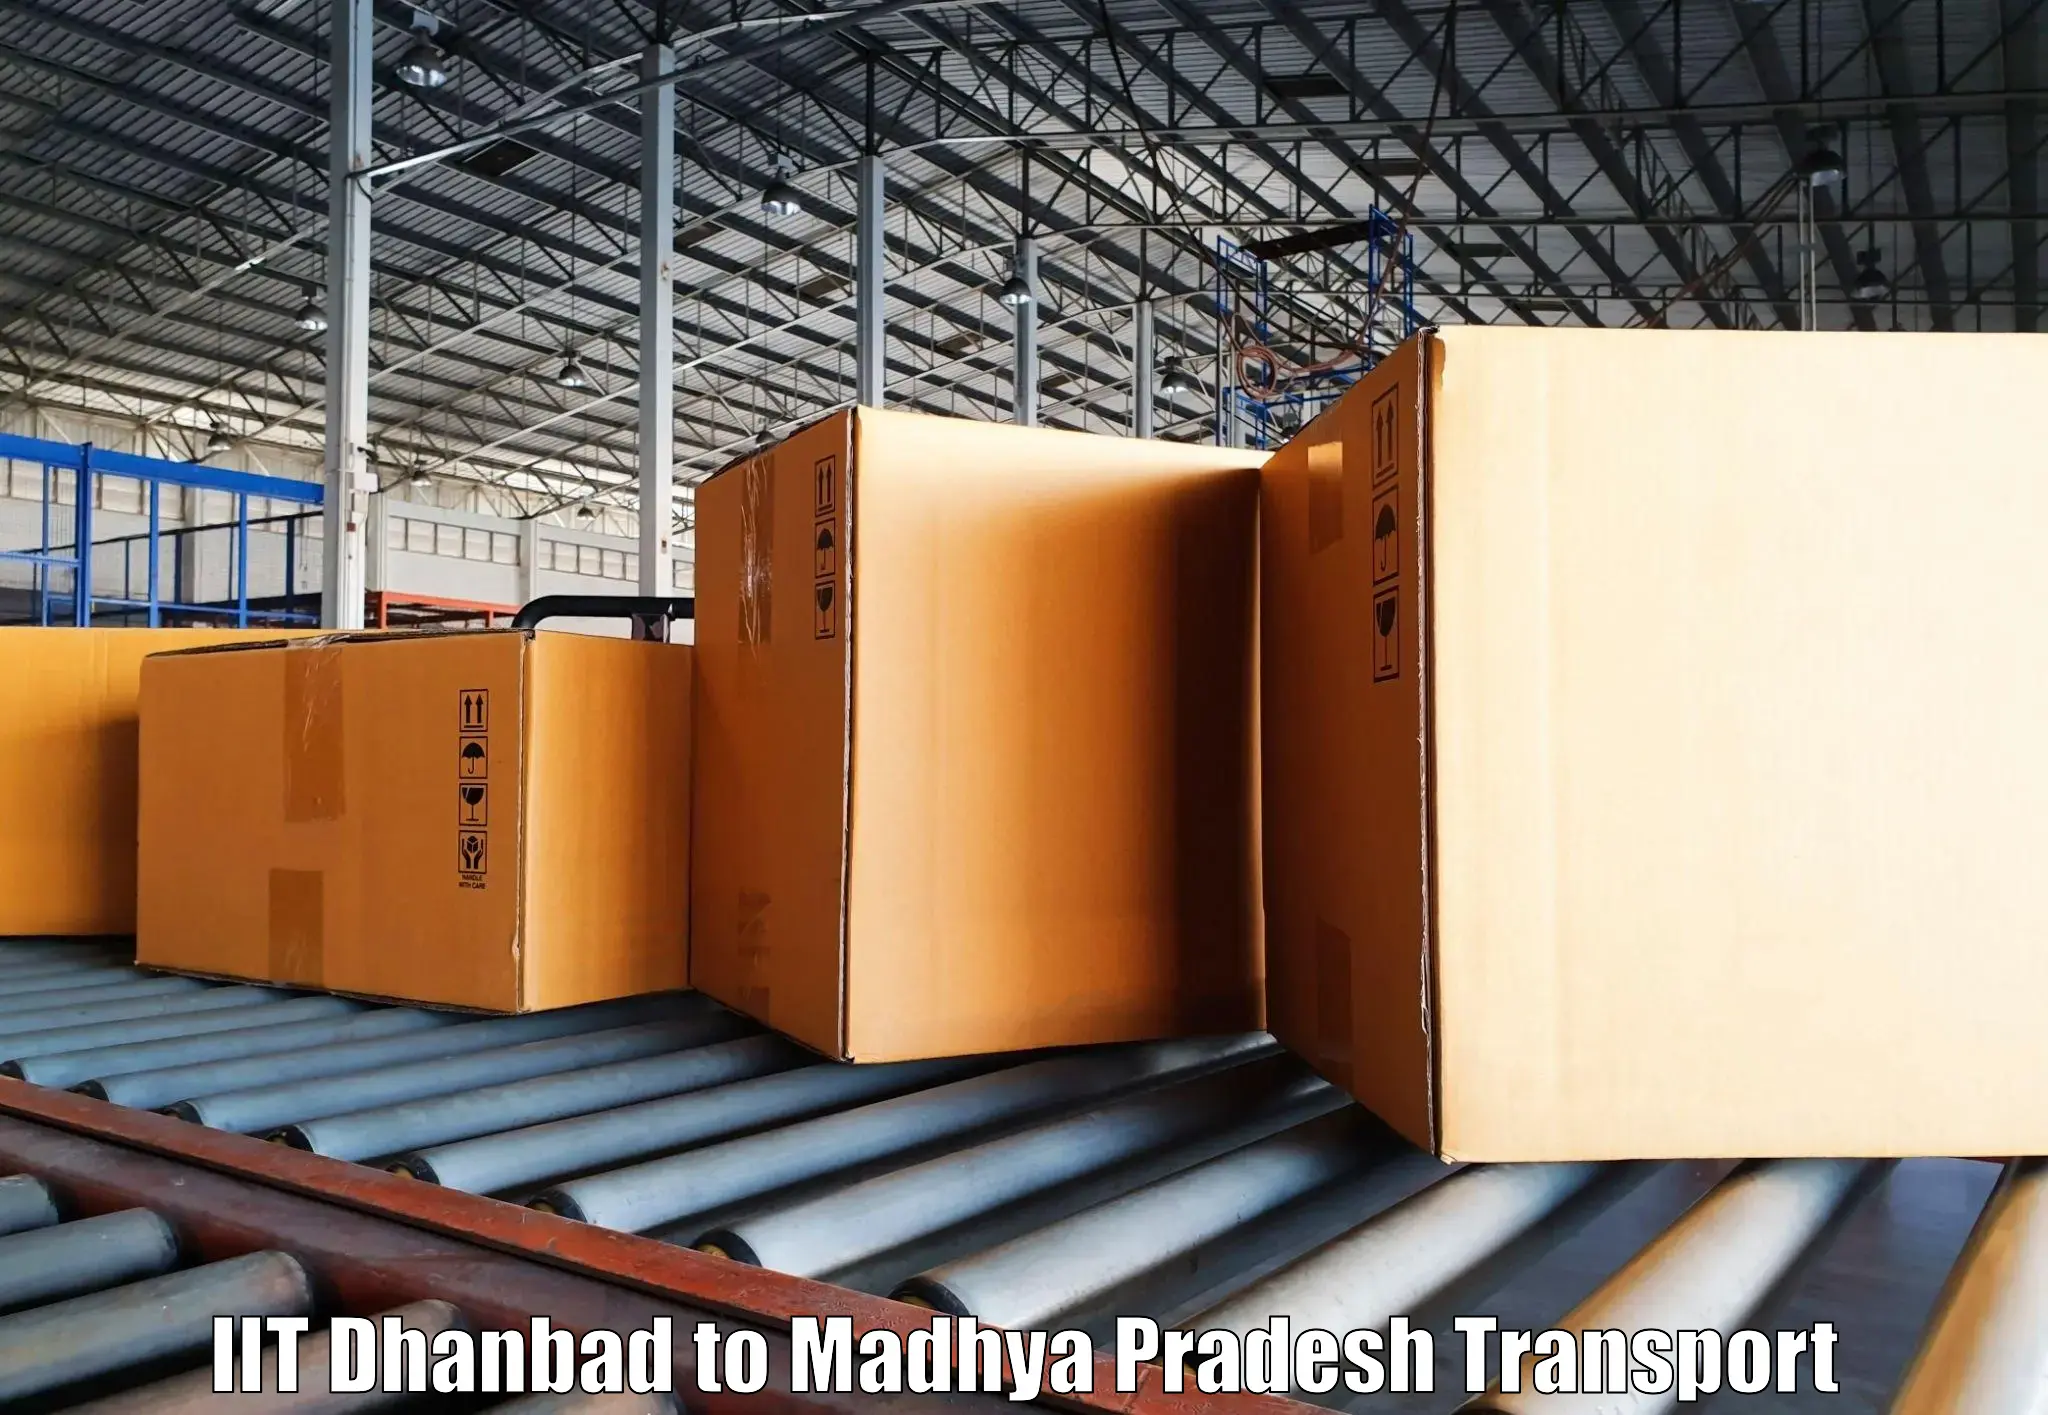 Truck transport companies in India IIT Dhanbad to Bhopal